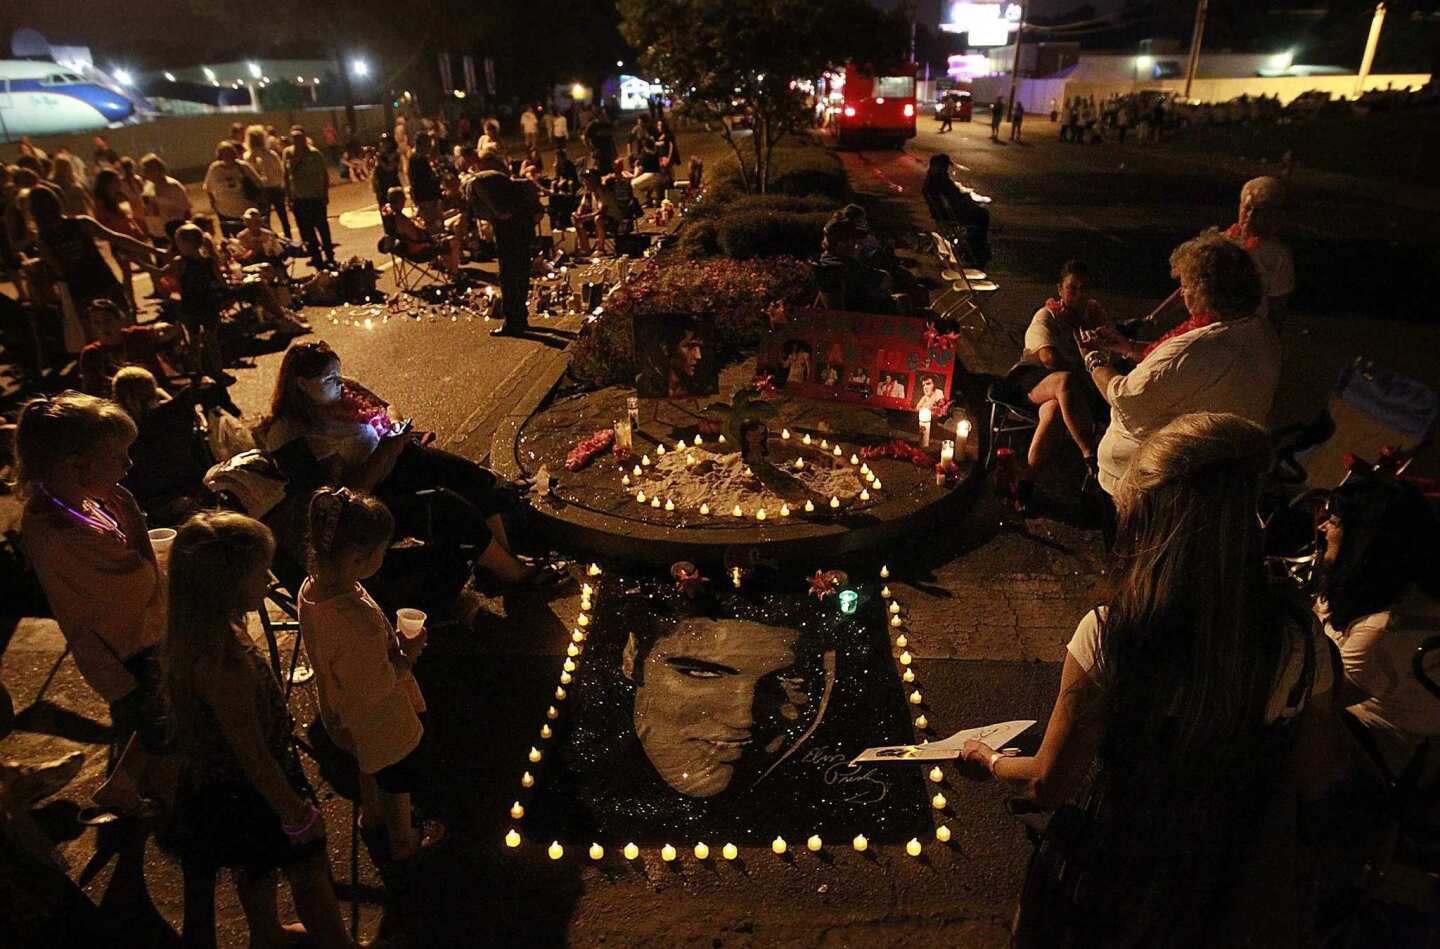 Fans create makeshift memorials to Elvis Presley on the street outside his mansion, Graceland. Elvis, known as the King of Rock 'n' Roll, died at Graceland on Aug. 16, 1977.